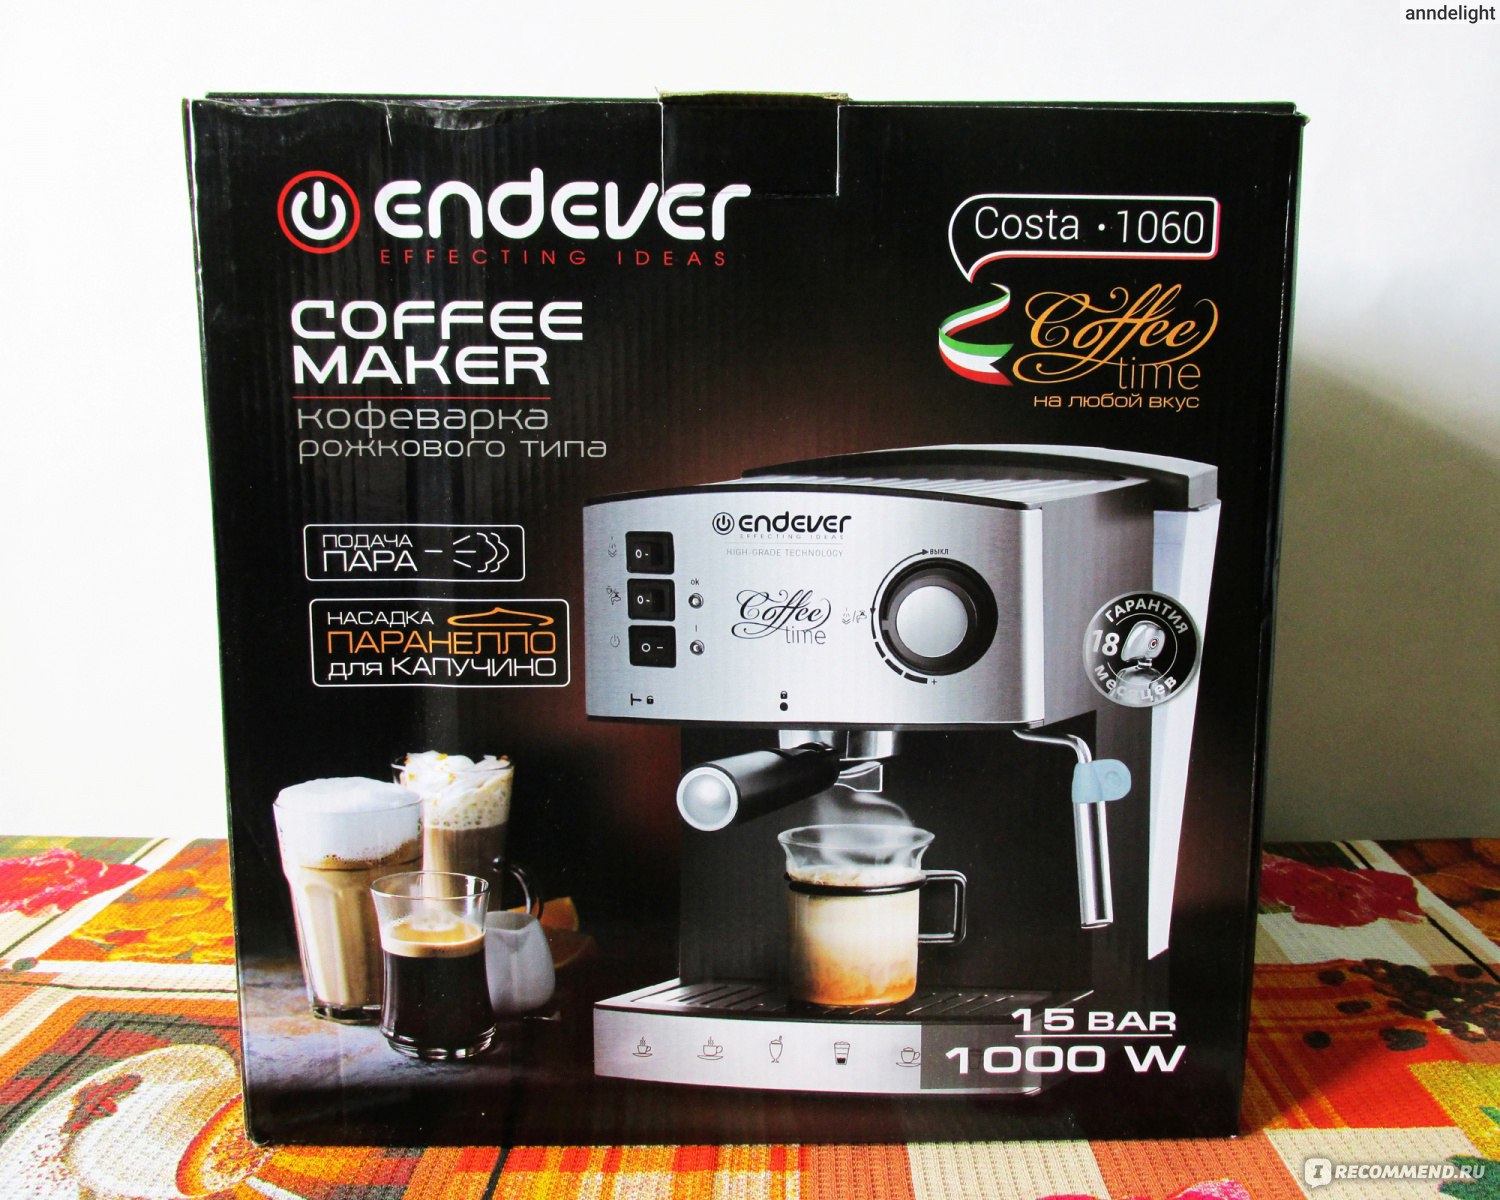 Endever costa 1060